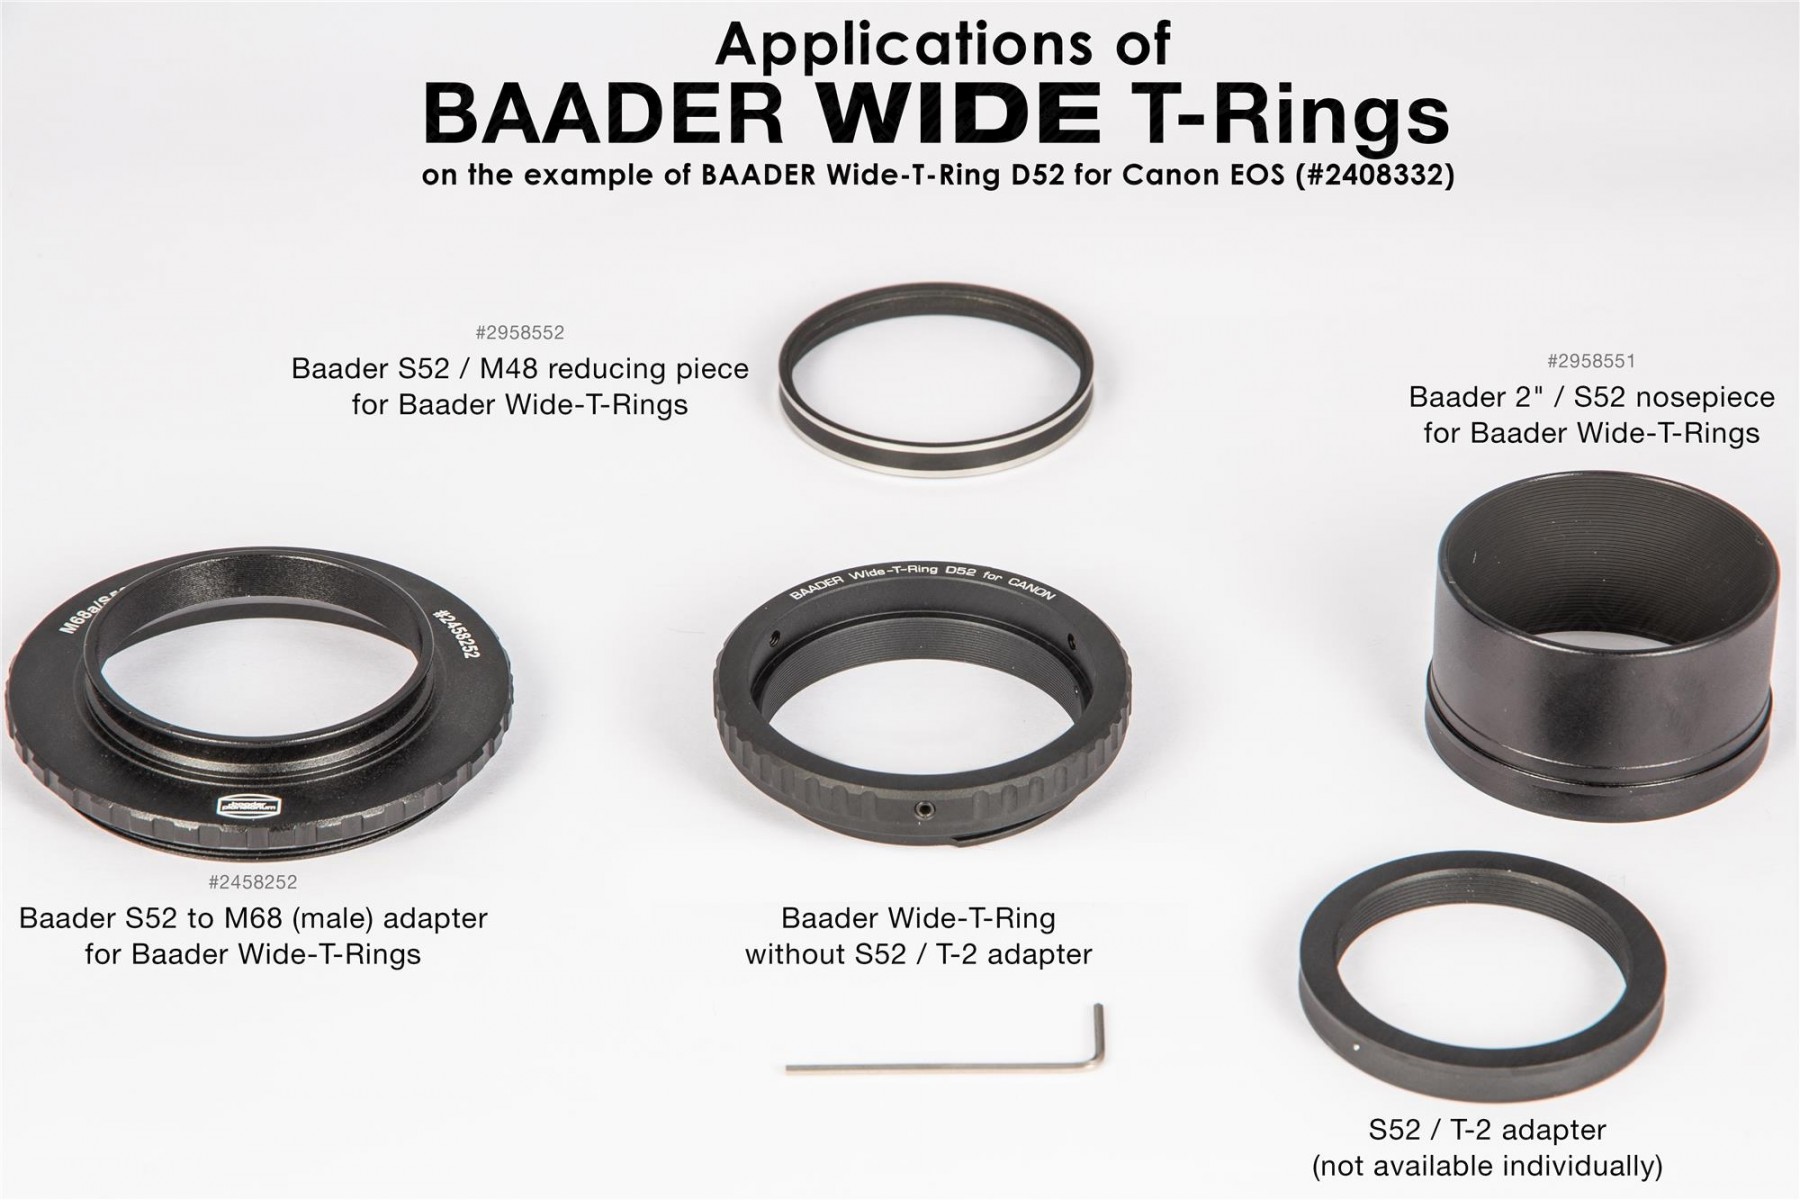 Wide-T-Ring with 2", M48 and M68 adapters